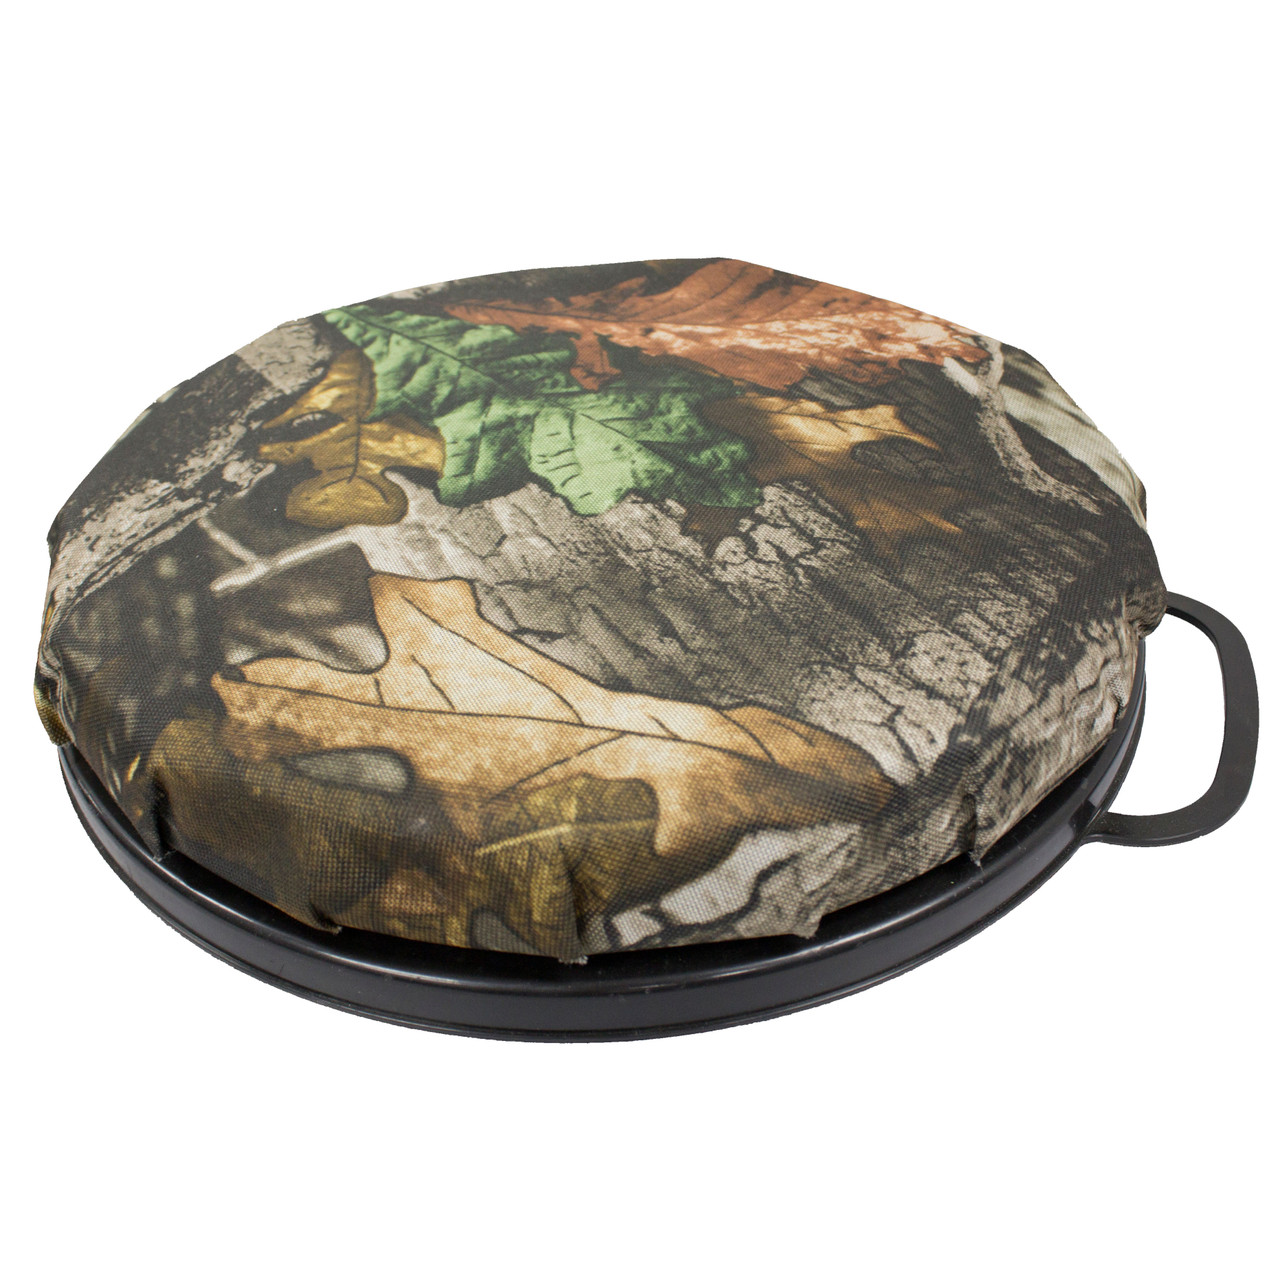 Hunting Made Easy Swivel Seat Fits 5gal Bucket Camo Covering  [FC-888151017364] - Cheaper Than Dirt